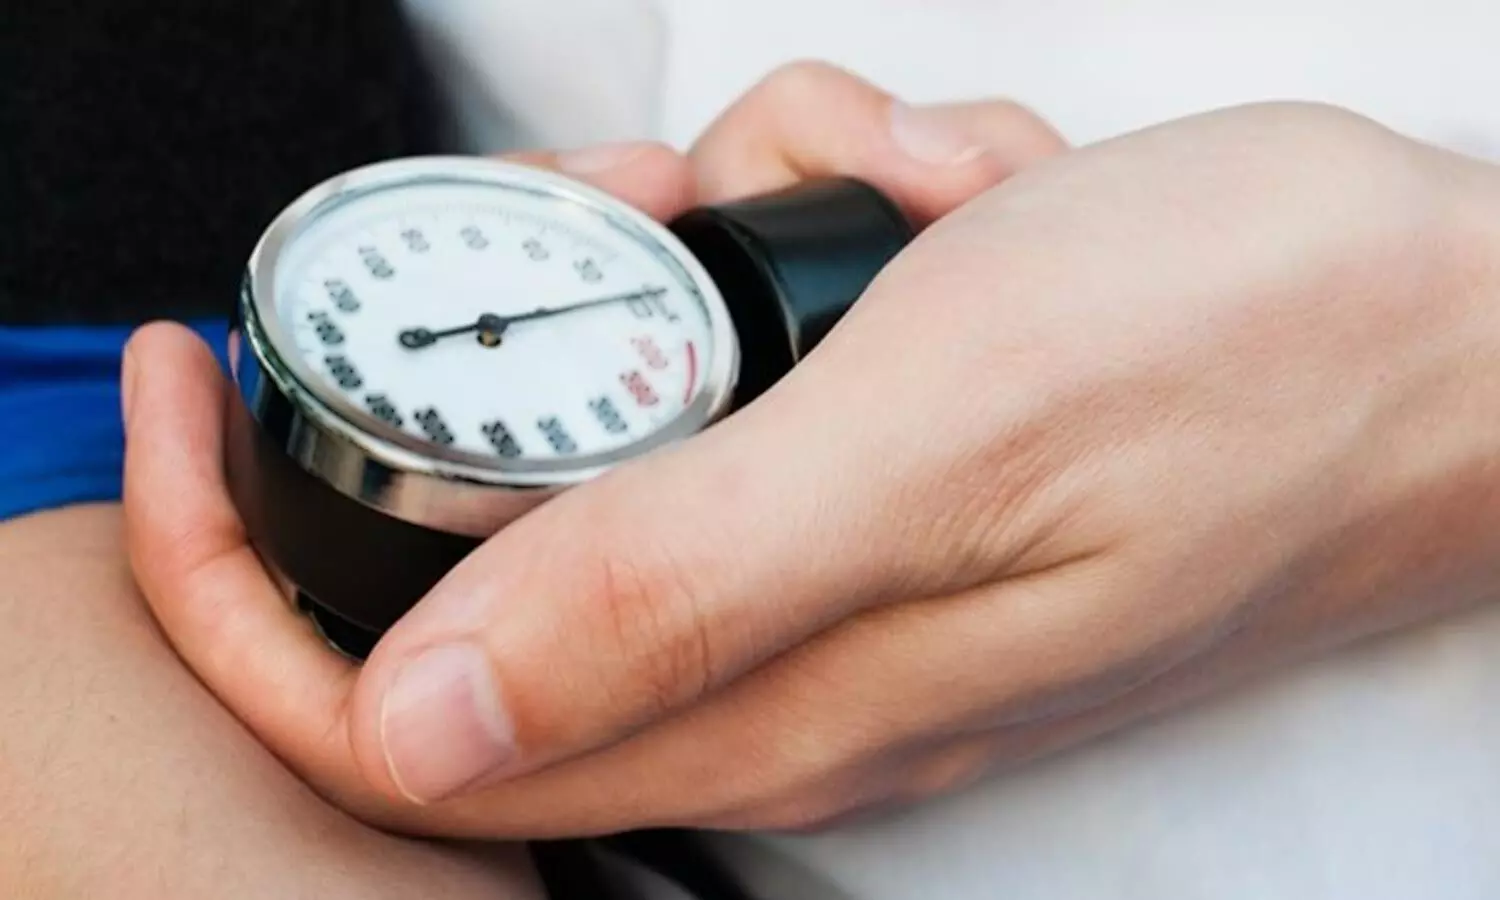 Women who develop high blood pressure after birth at greater risk of chronic hypertension